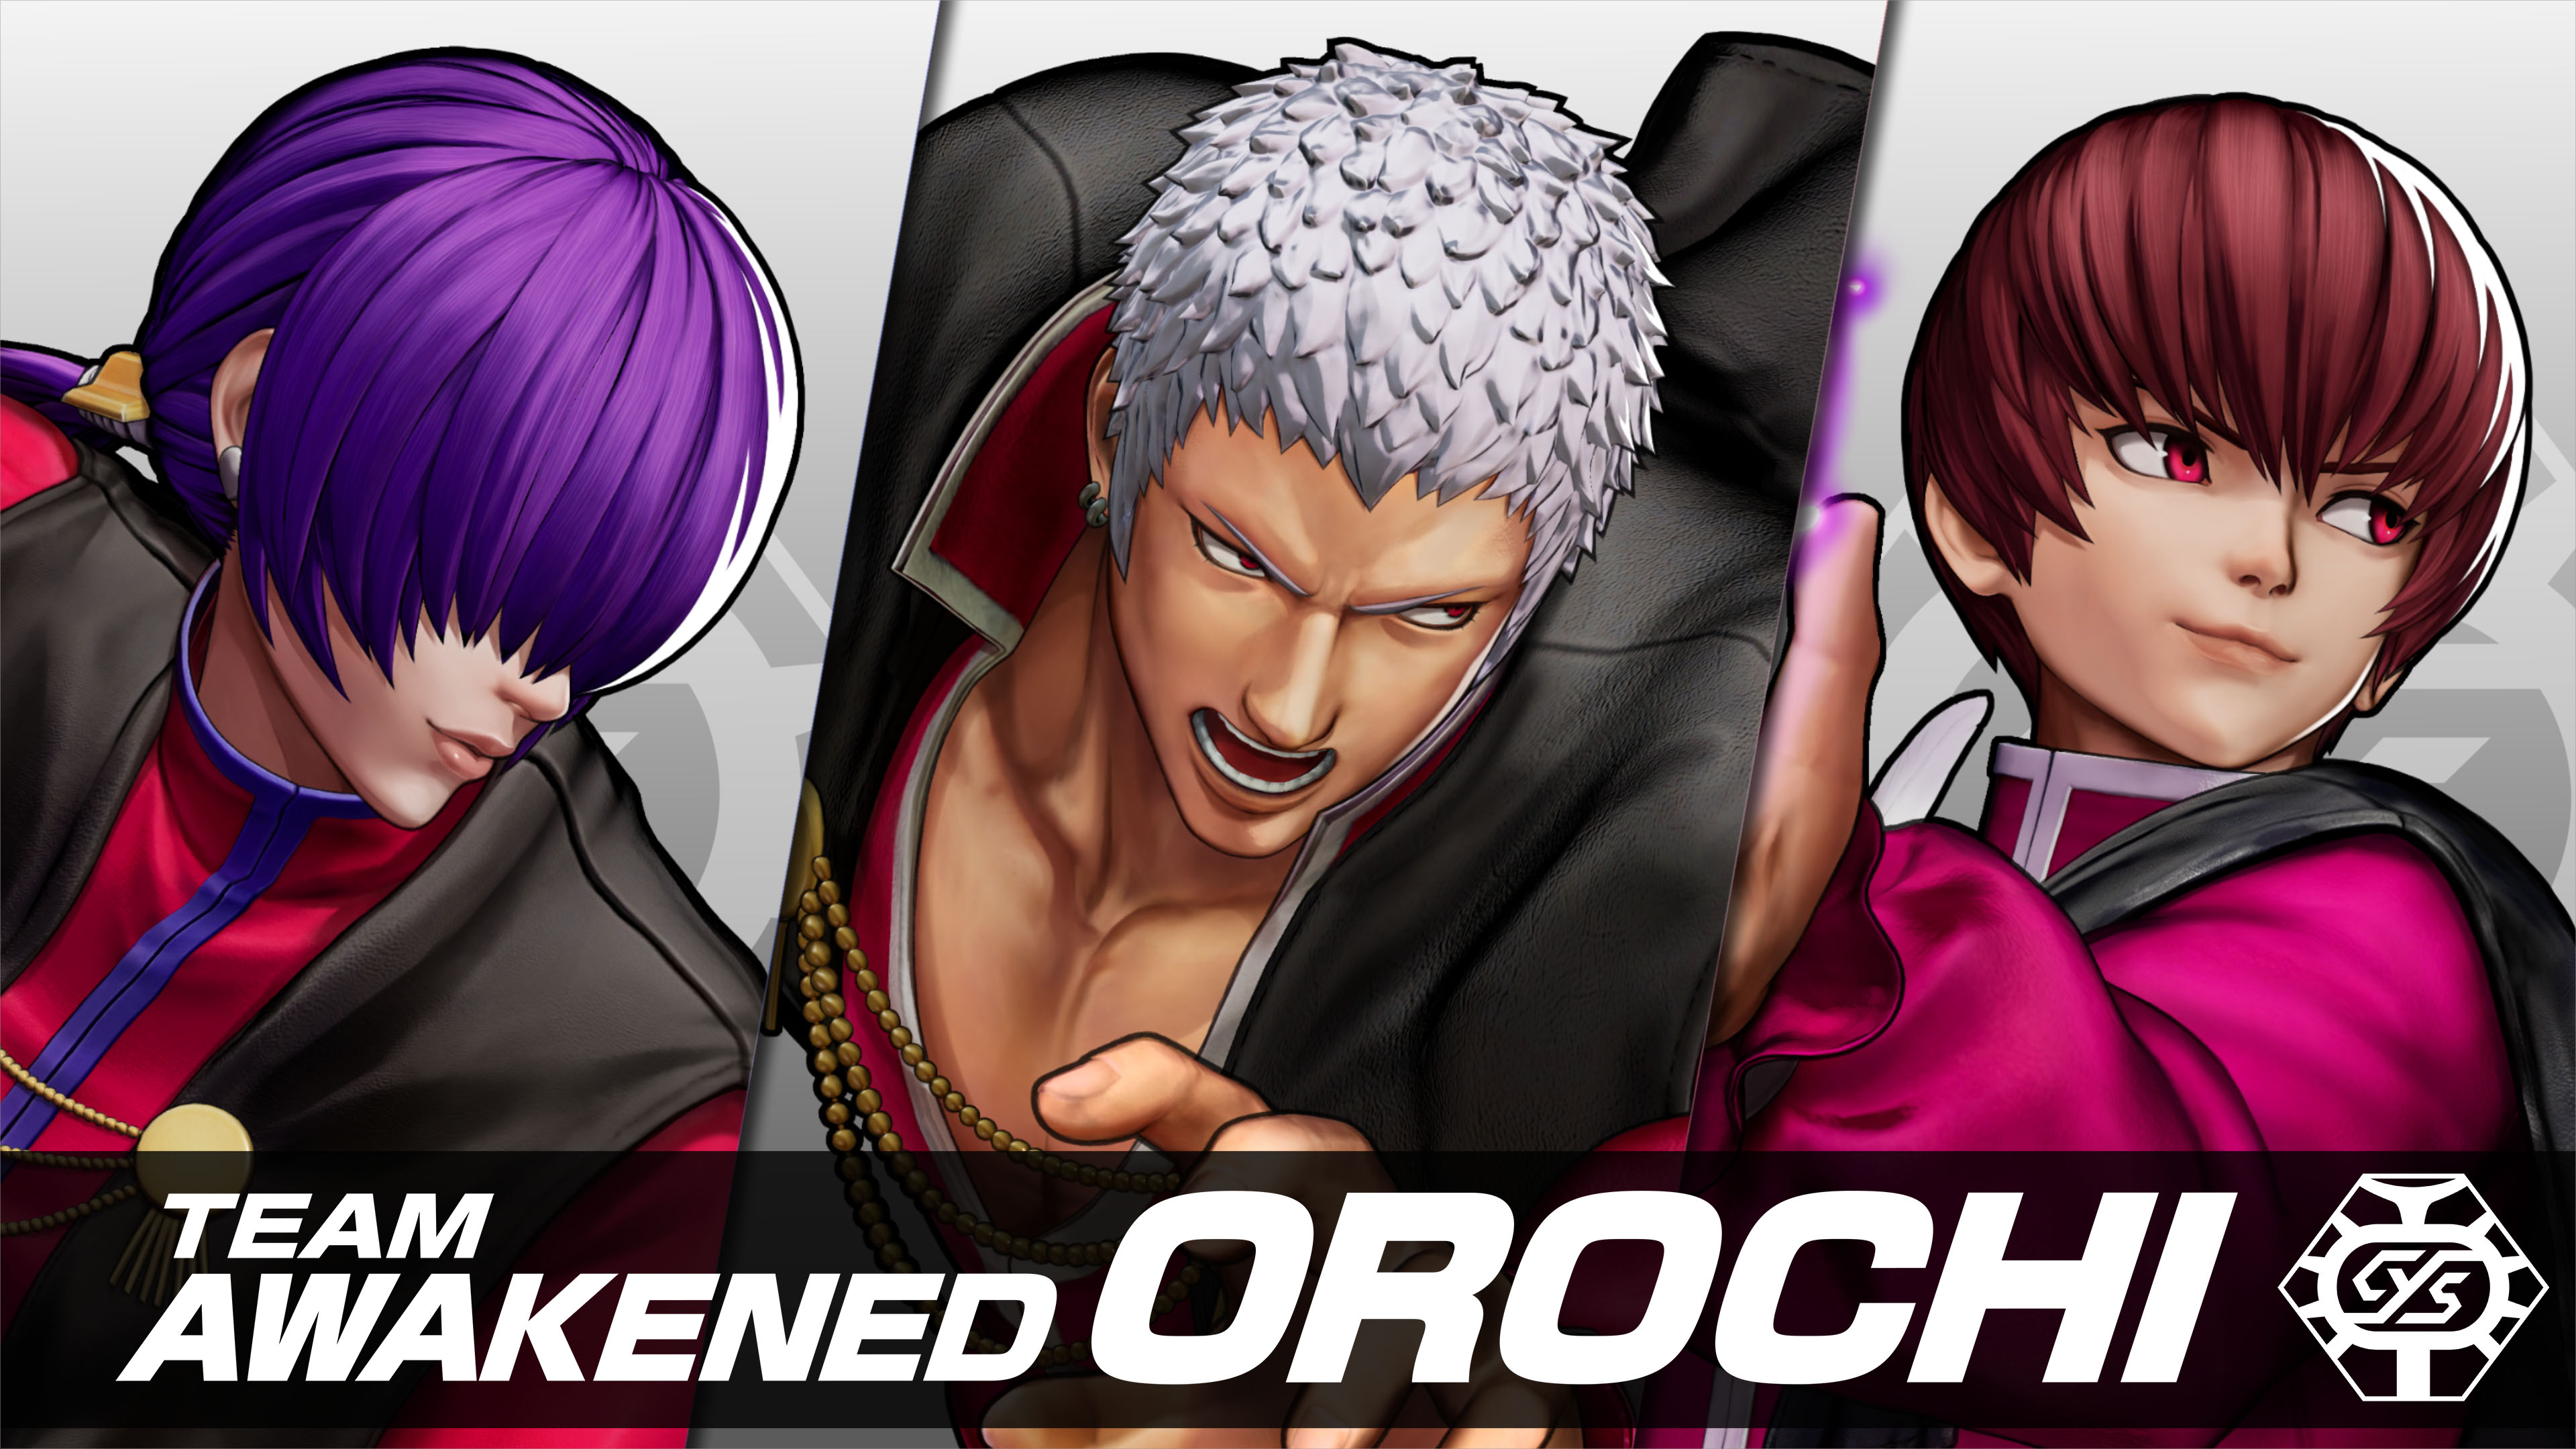 The King of Fighters XV DLC characters roadmap announced - Gematsu